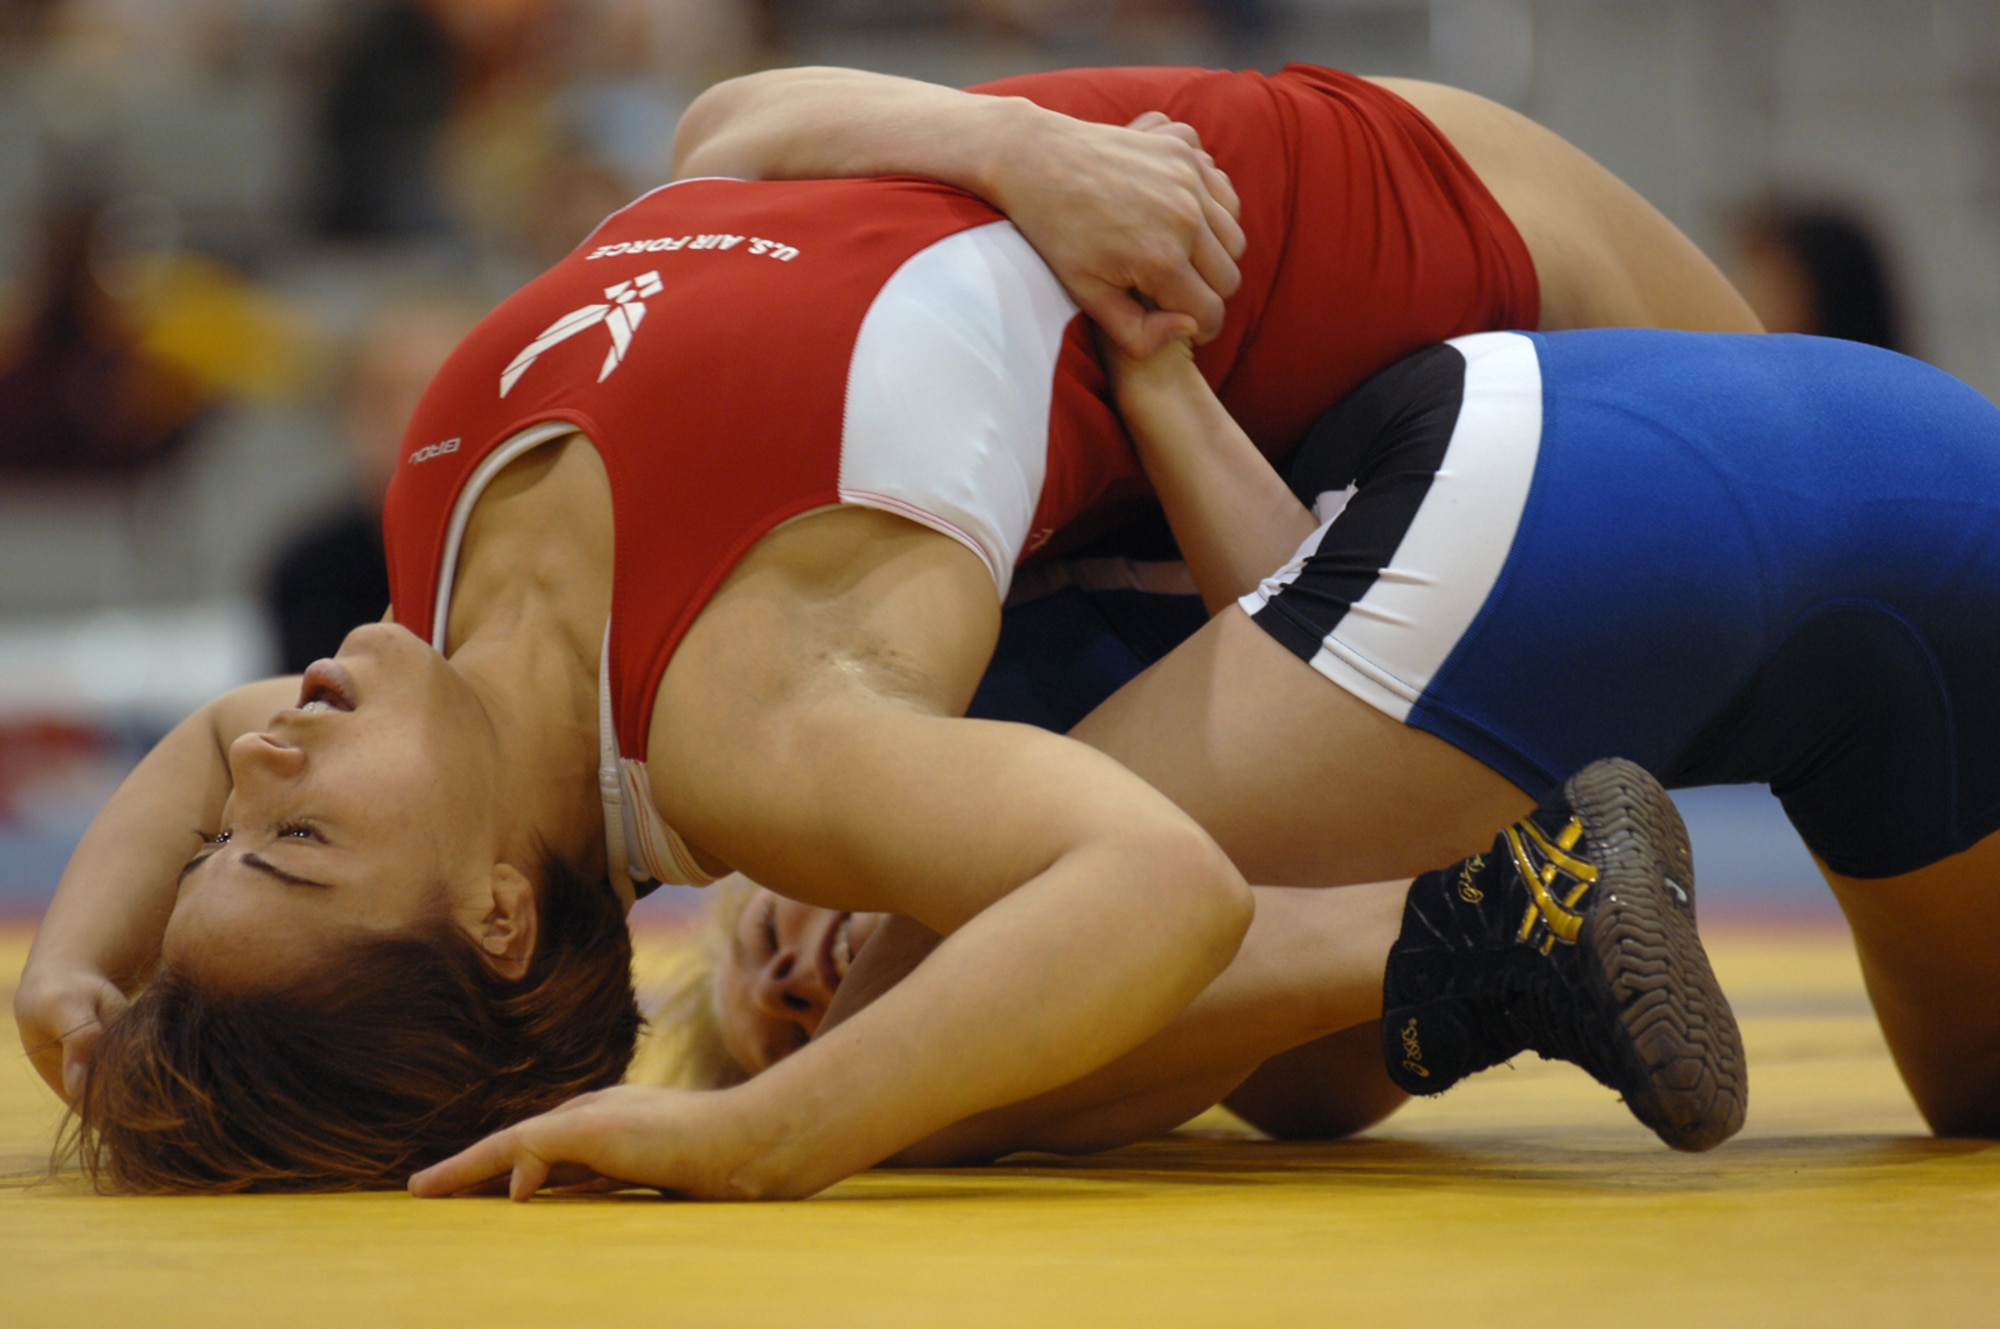 LAS VEGAS—Air Force wrestler Senior Airman Rachel Bernardes (red) attempts to break a hold from her opponent, Sara Fulp-Allen, New York Athletic Club, in second-round competition of the senior women’s freestyle tournament, 48 kilos, during the 2008 U.S. National Wrestling Championships April 24 at the Las Vegas Convention Center. The Air Force wrestling team finished the tournament with three overall place wins. (U.S. Air Force photo/Airman 1st Class Brian Ybarbo)